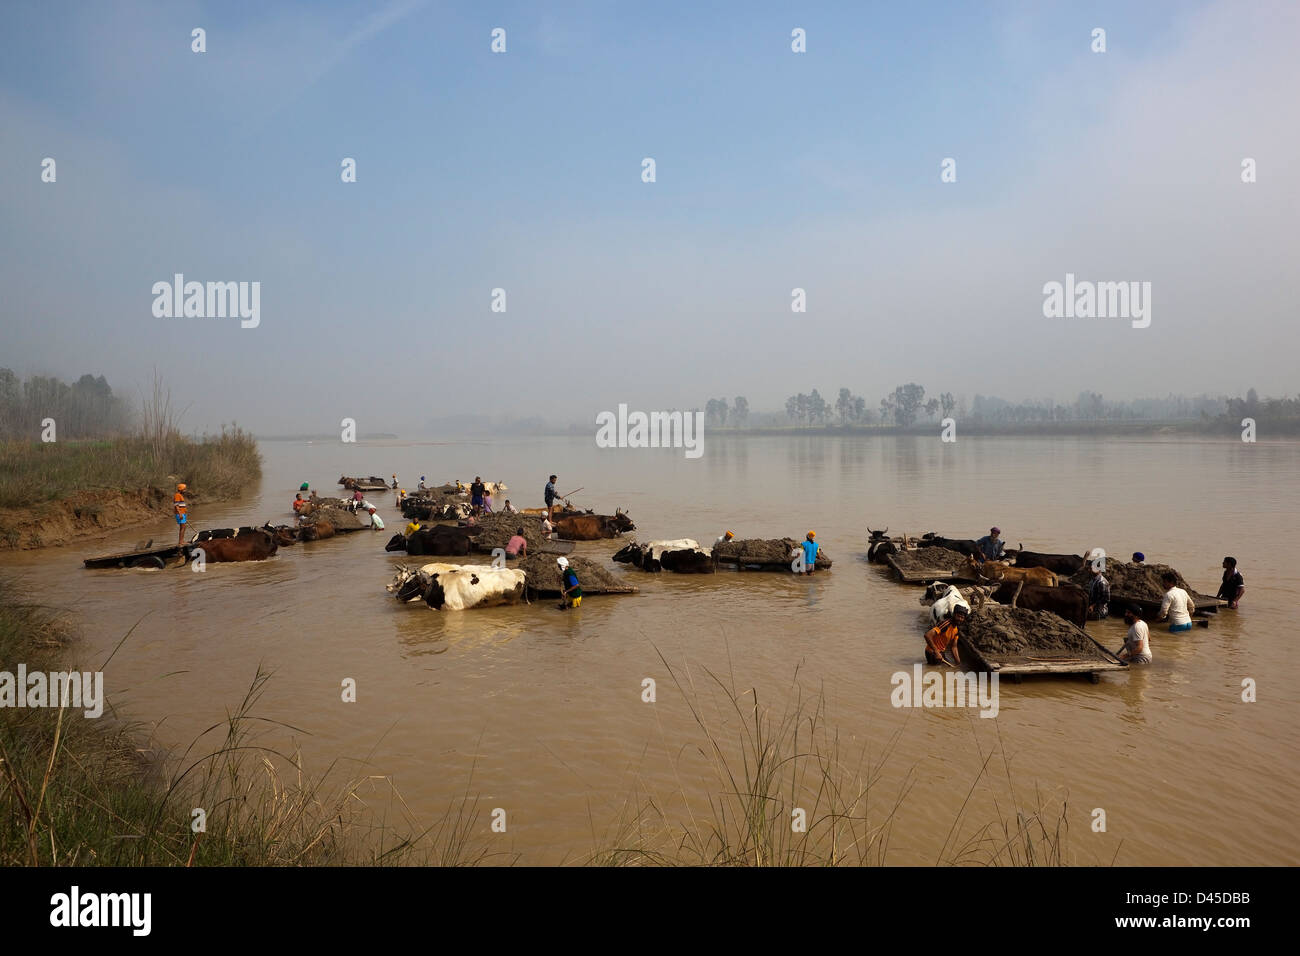 Punjabi workmen with cattle carts collecting sand from the river Beas on a hazy morning in the Punjab India Stock Photo